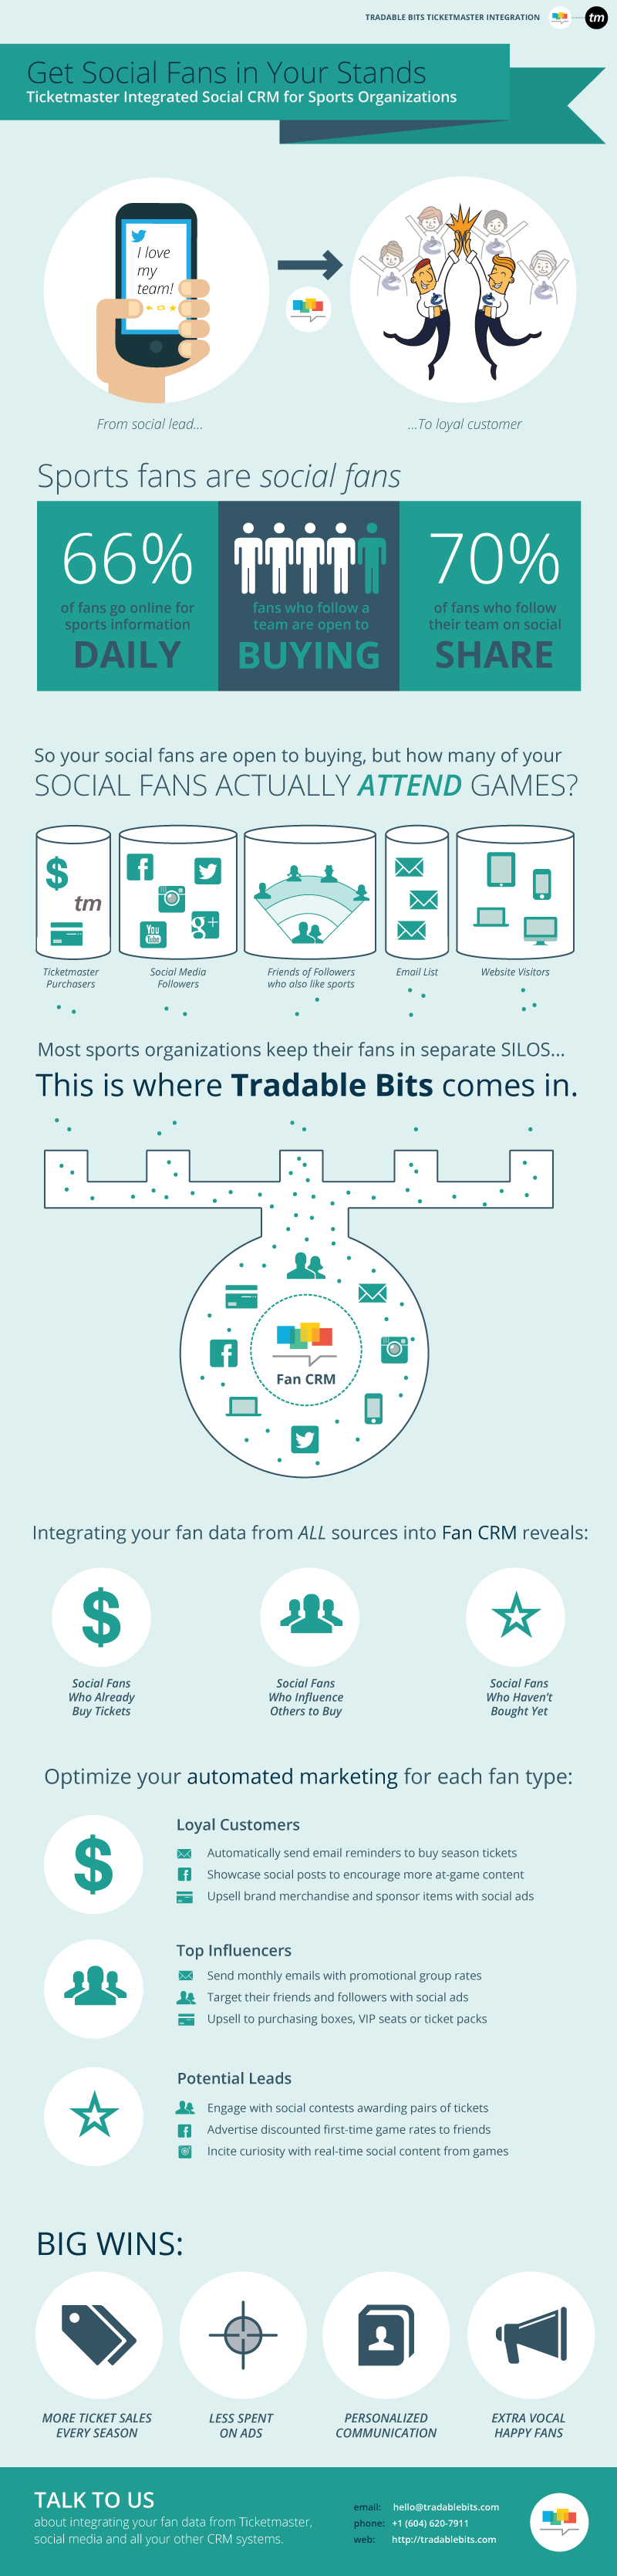 Infographic: How to Get Social Fans into Stadium Stands